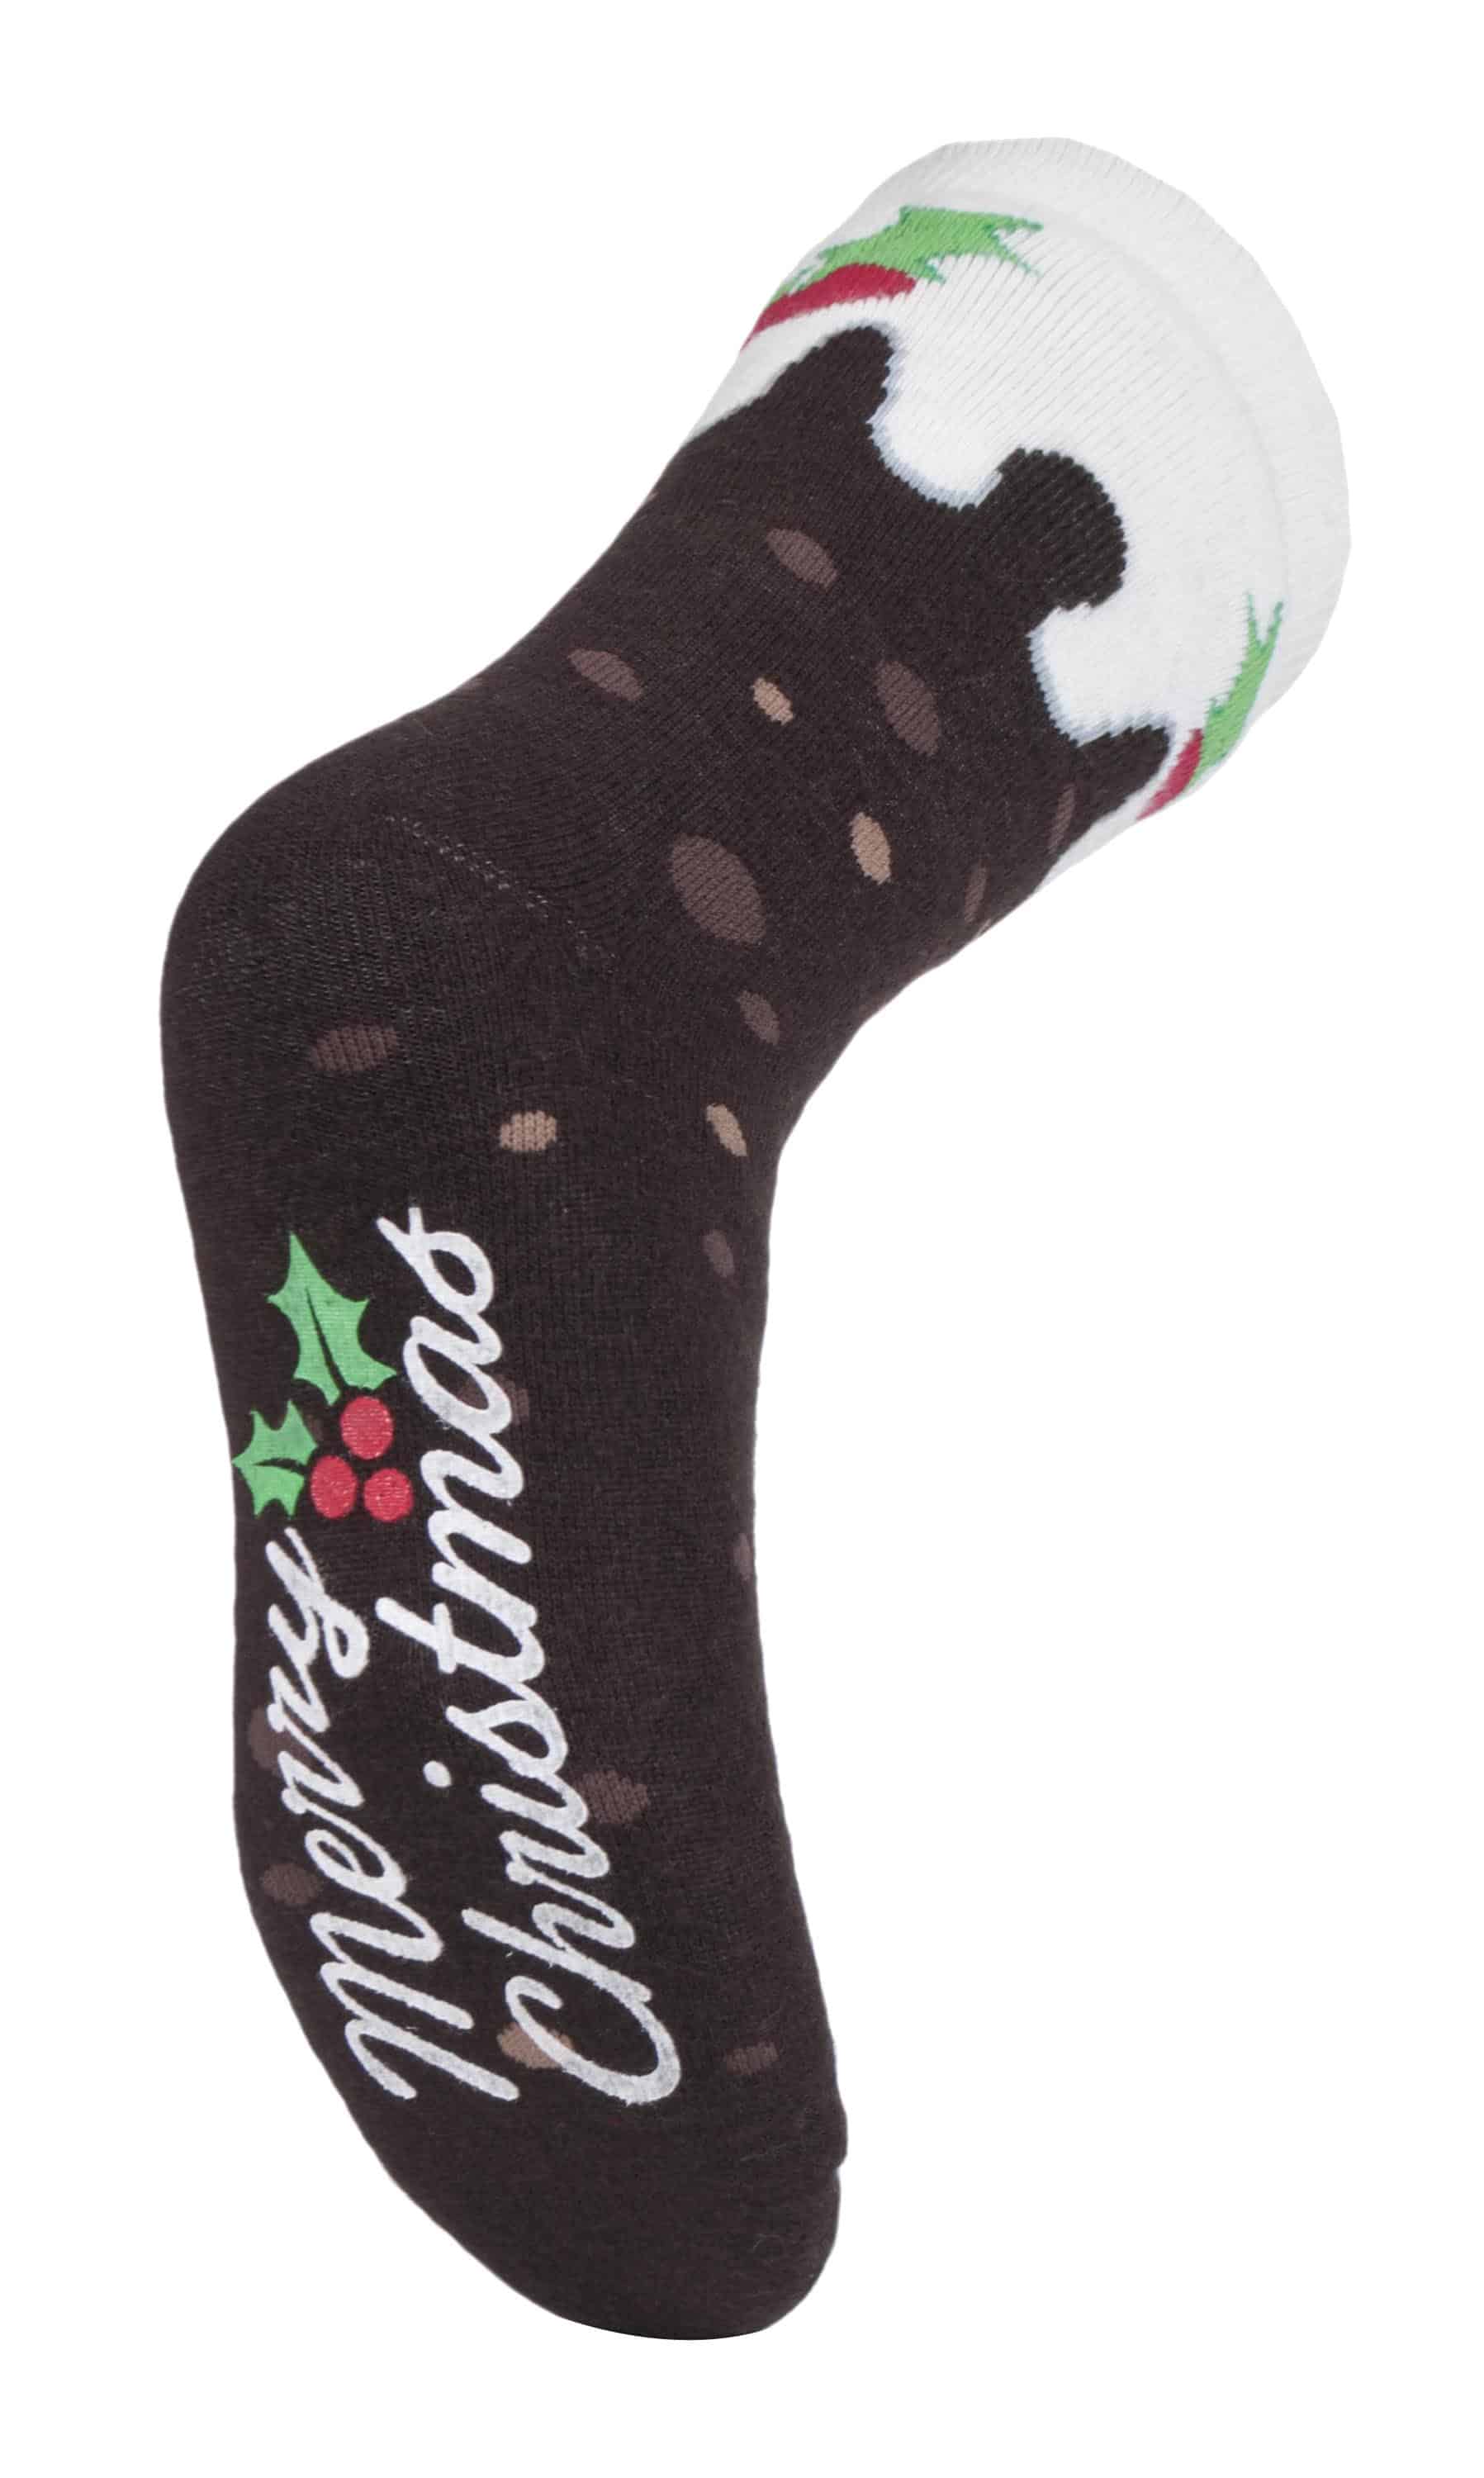 Mens Soul Warming Thick Winter Nordic Patterned Non Slip Thermal Slipper Socks with Grippers Heat Holders